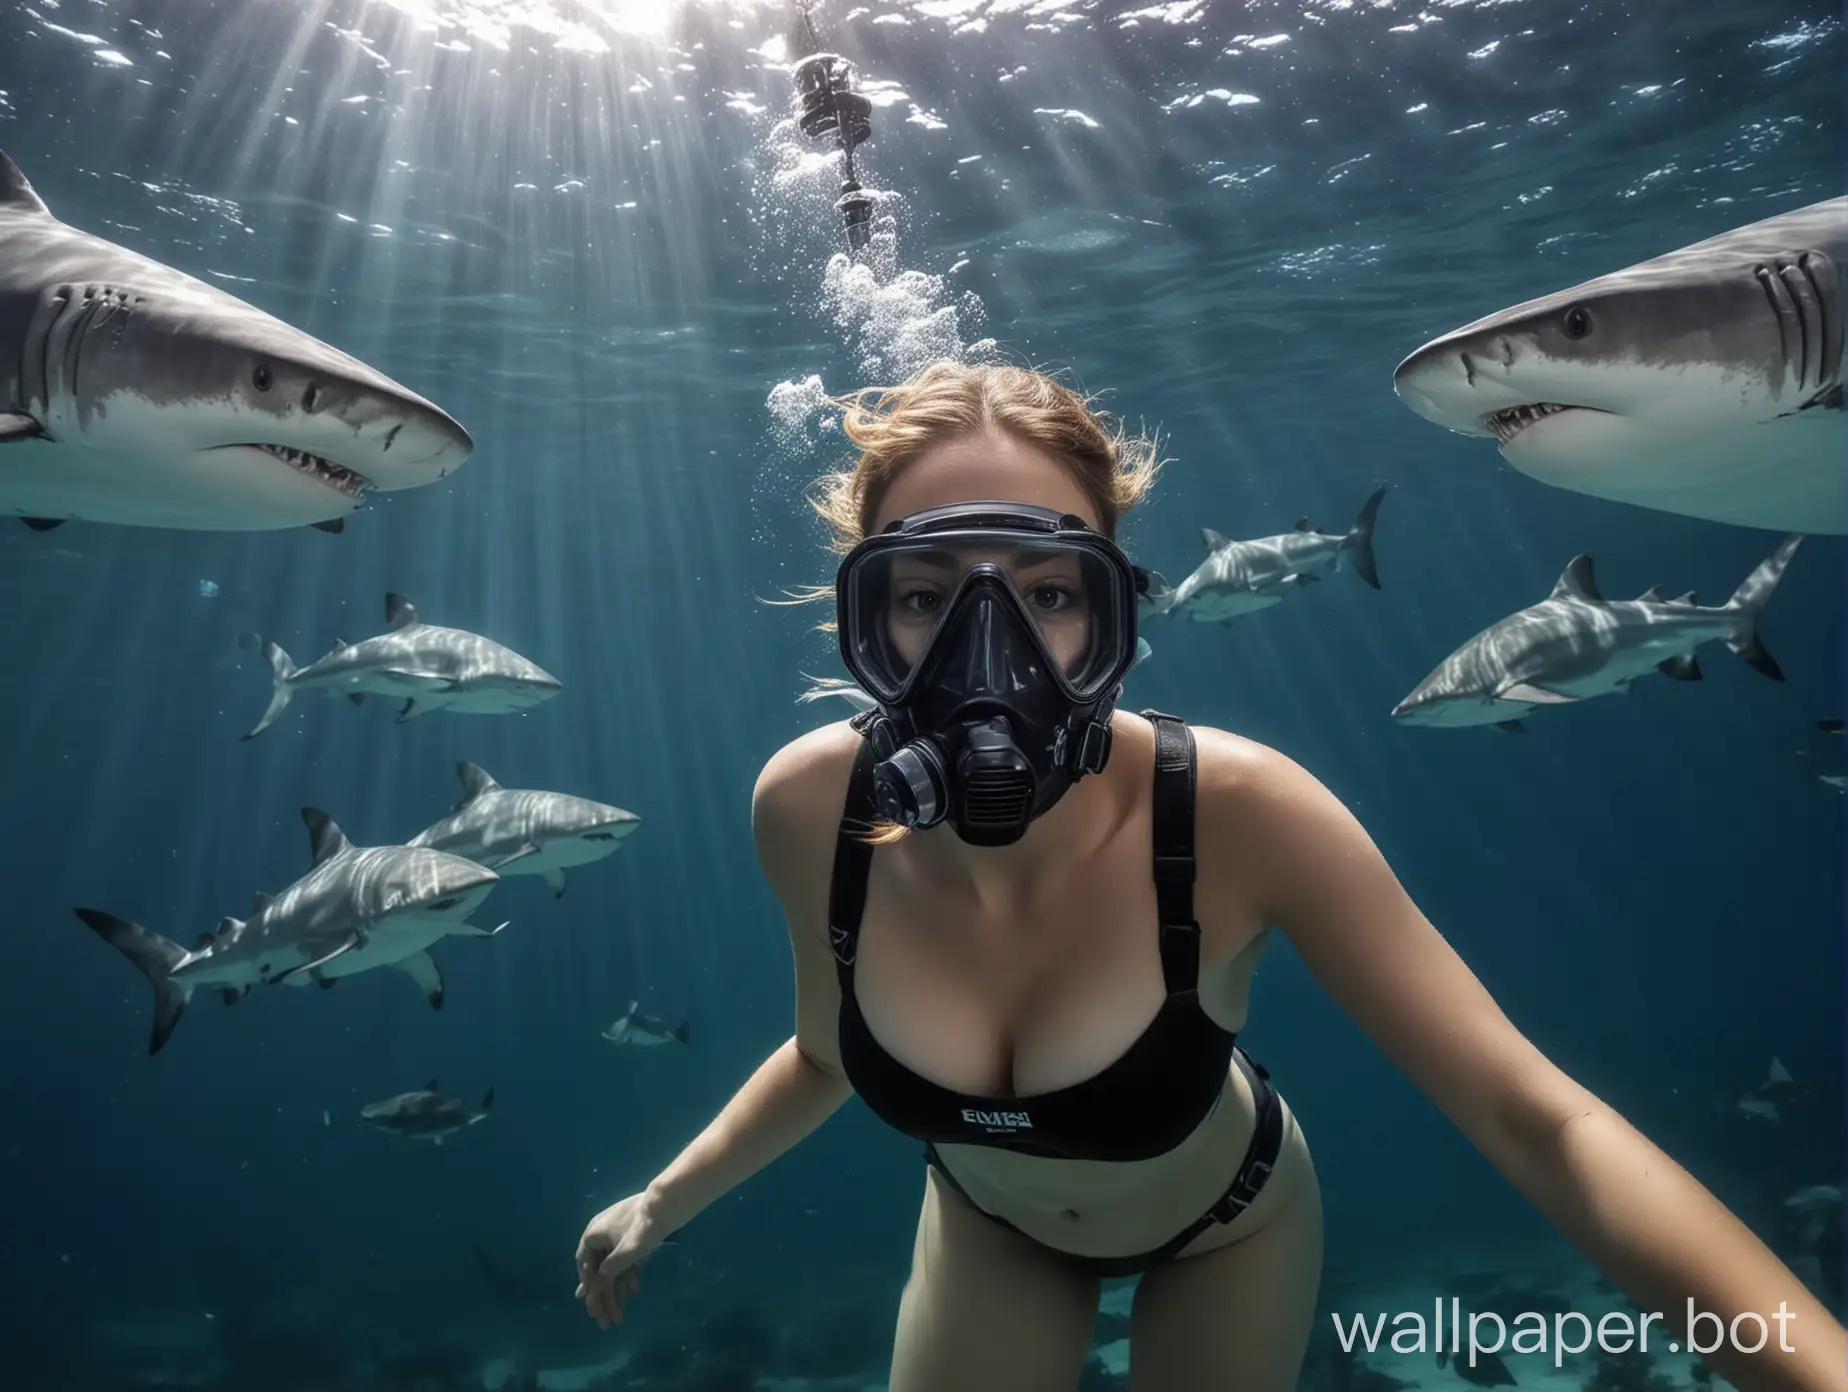 Girl diver naked with big breasts swims underwater in scuba tank, in a breathing mask, view from underwater, against the background of sharks